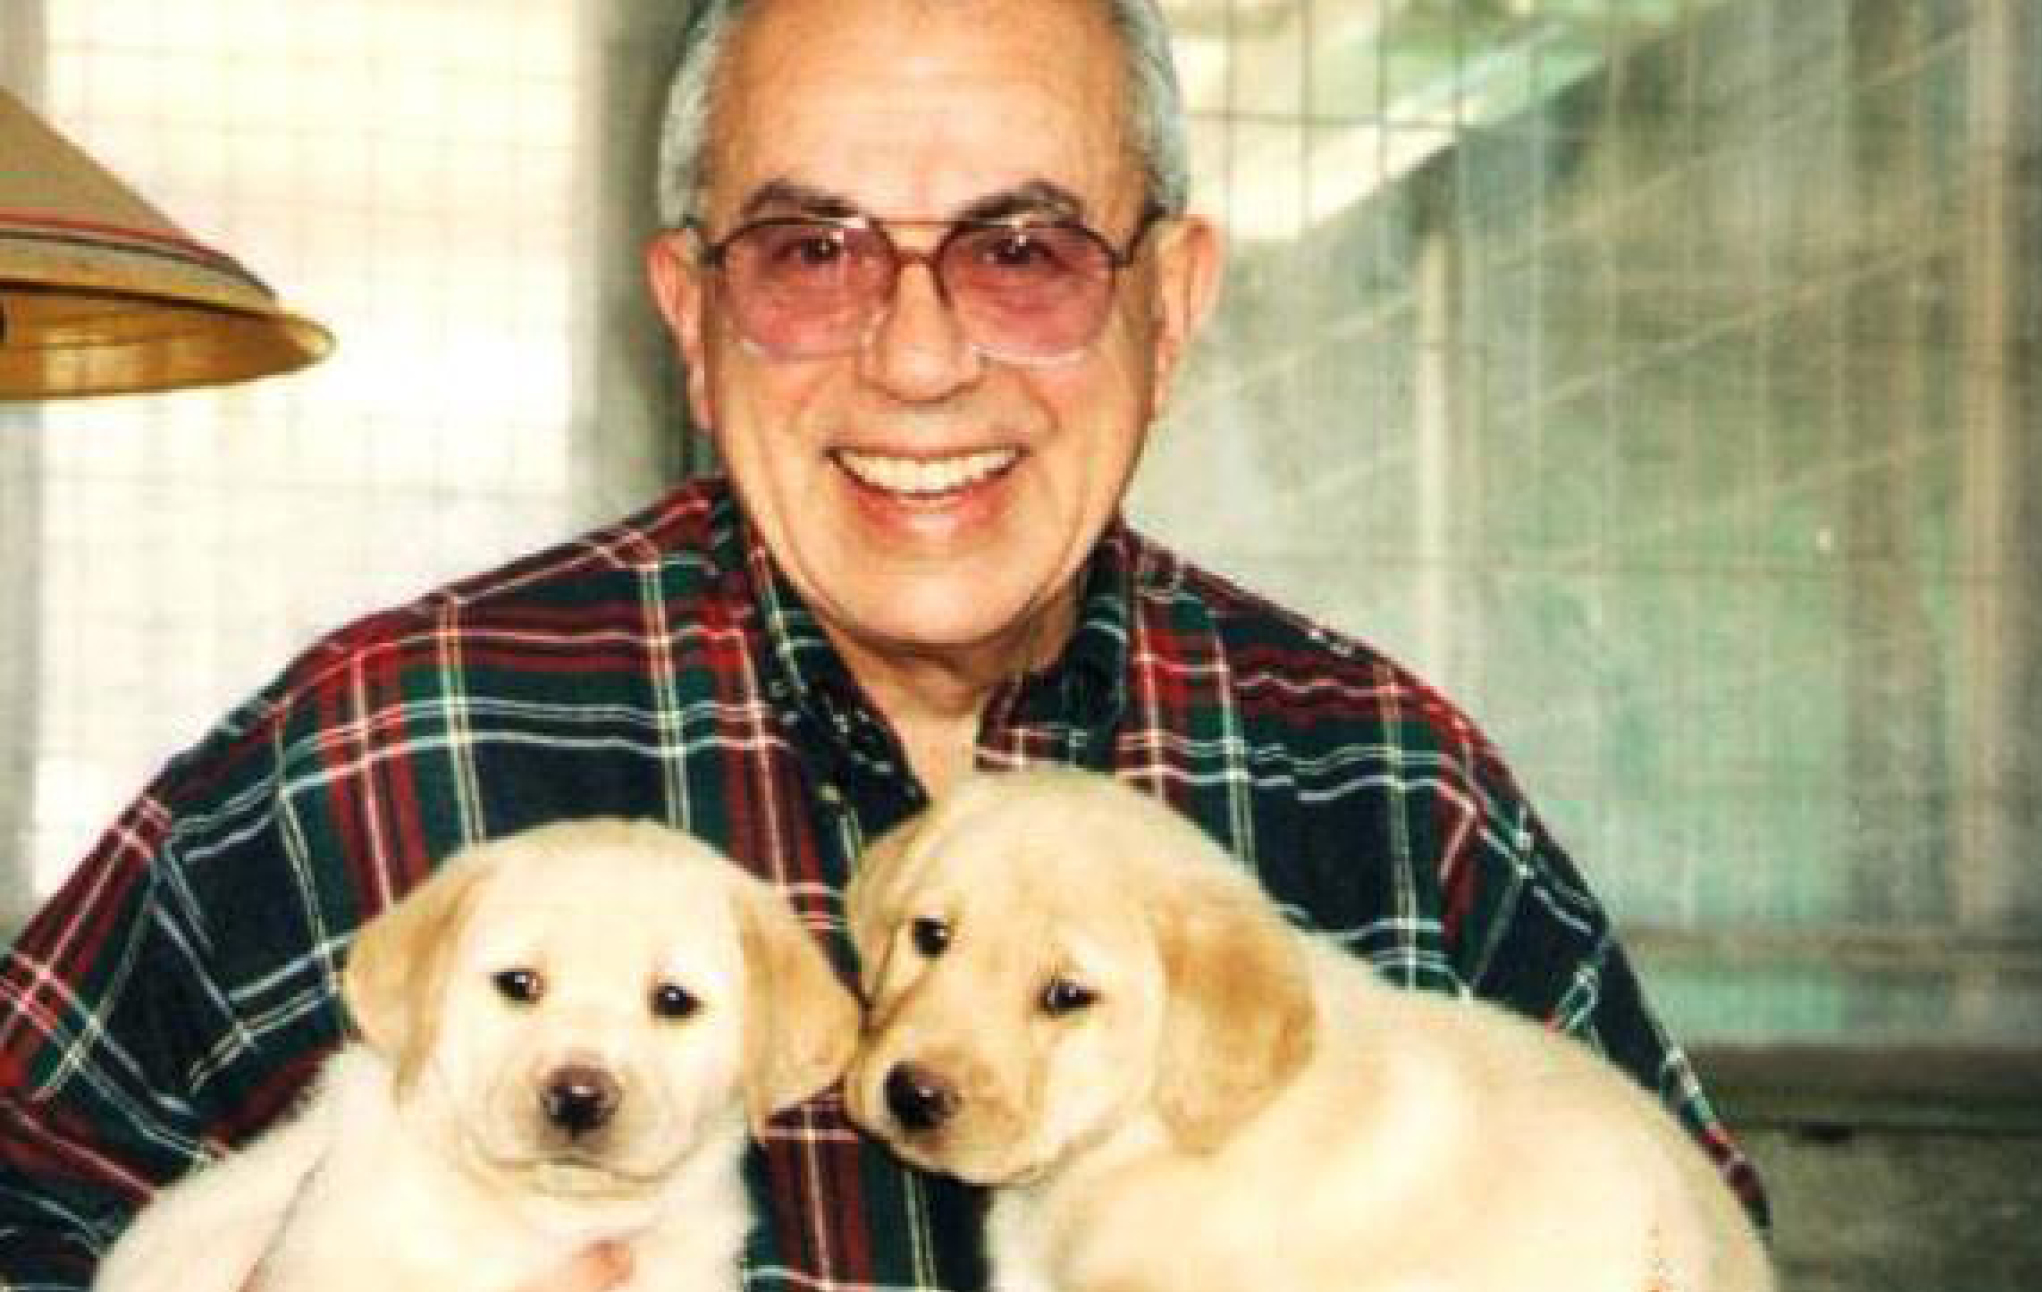 Founder, Norm Leventhal with two puppies